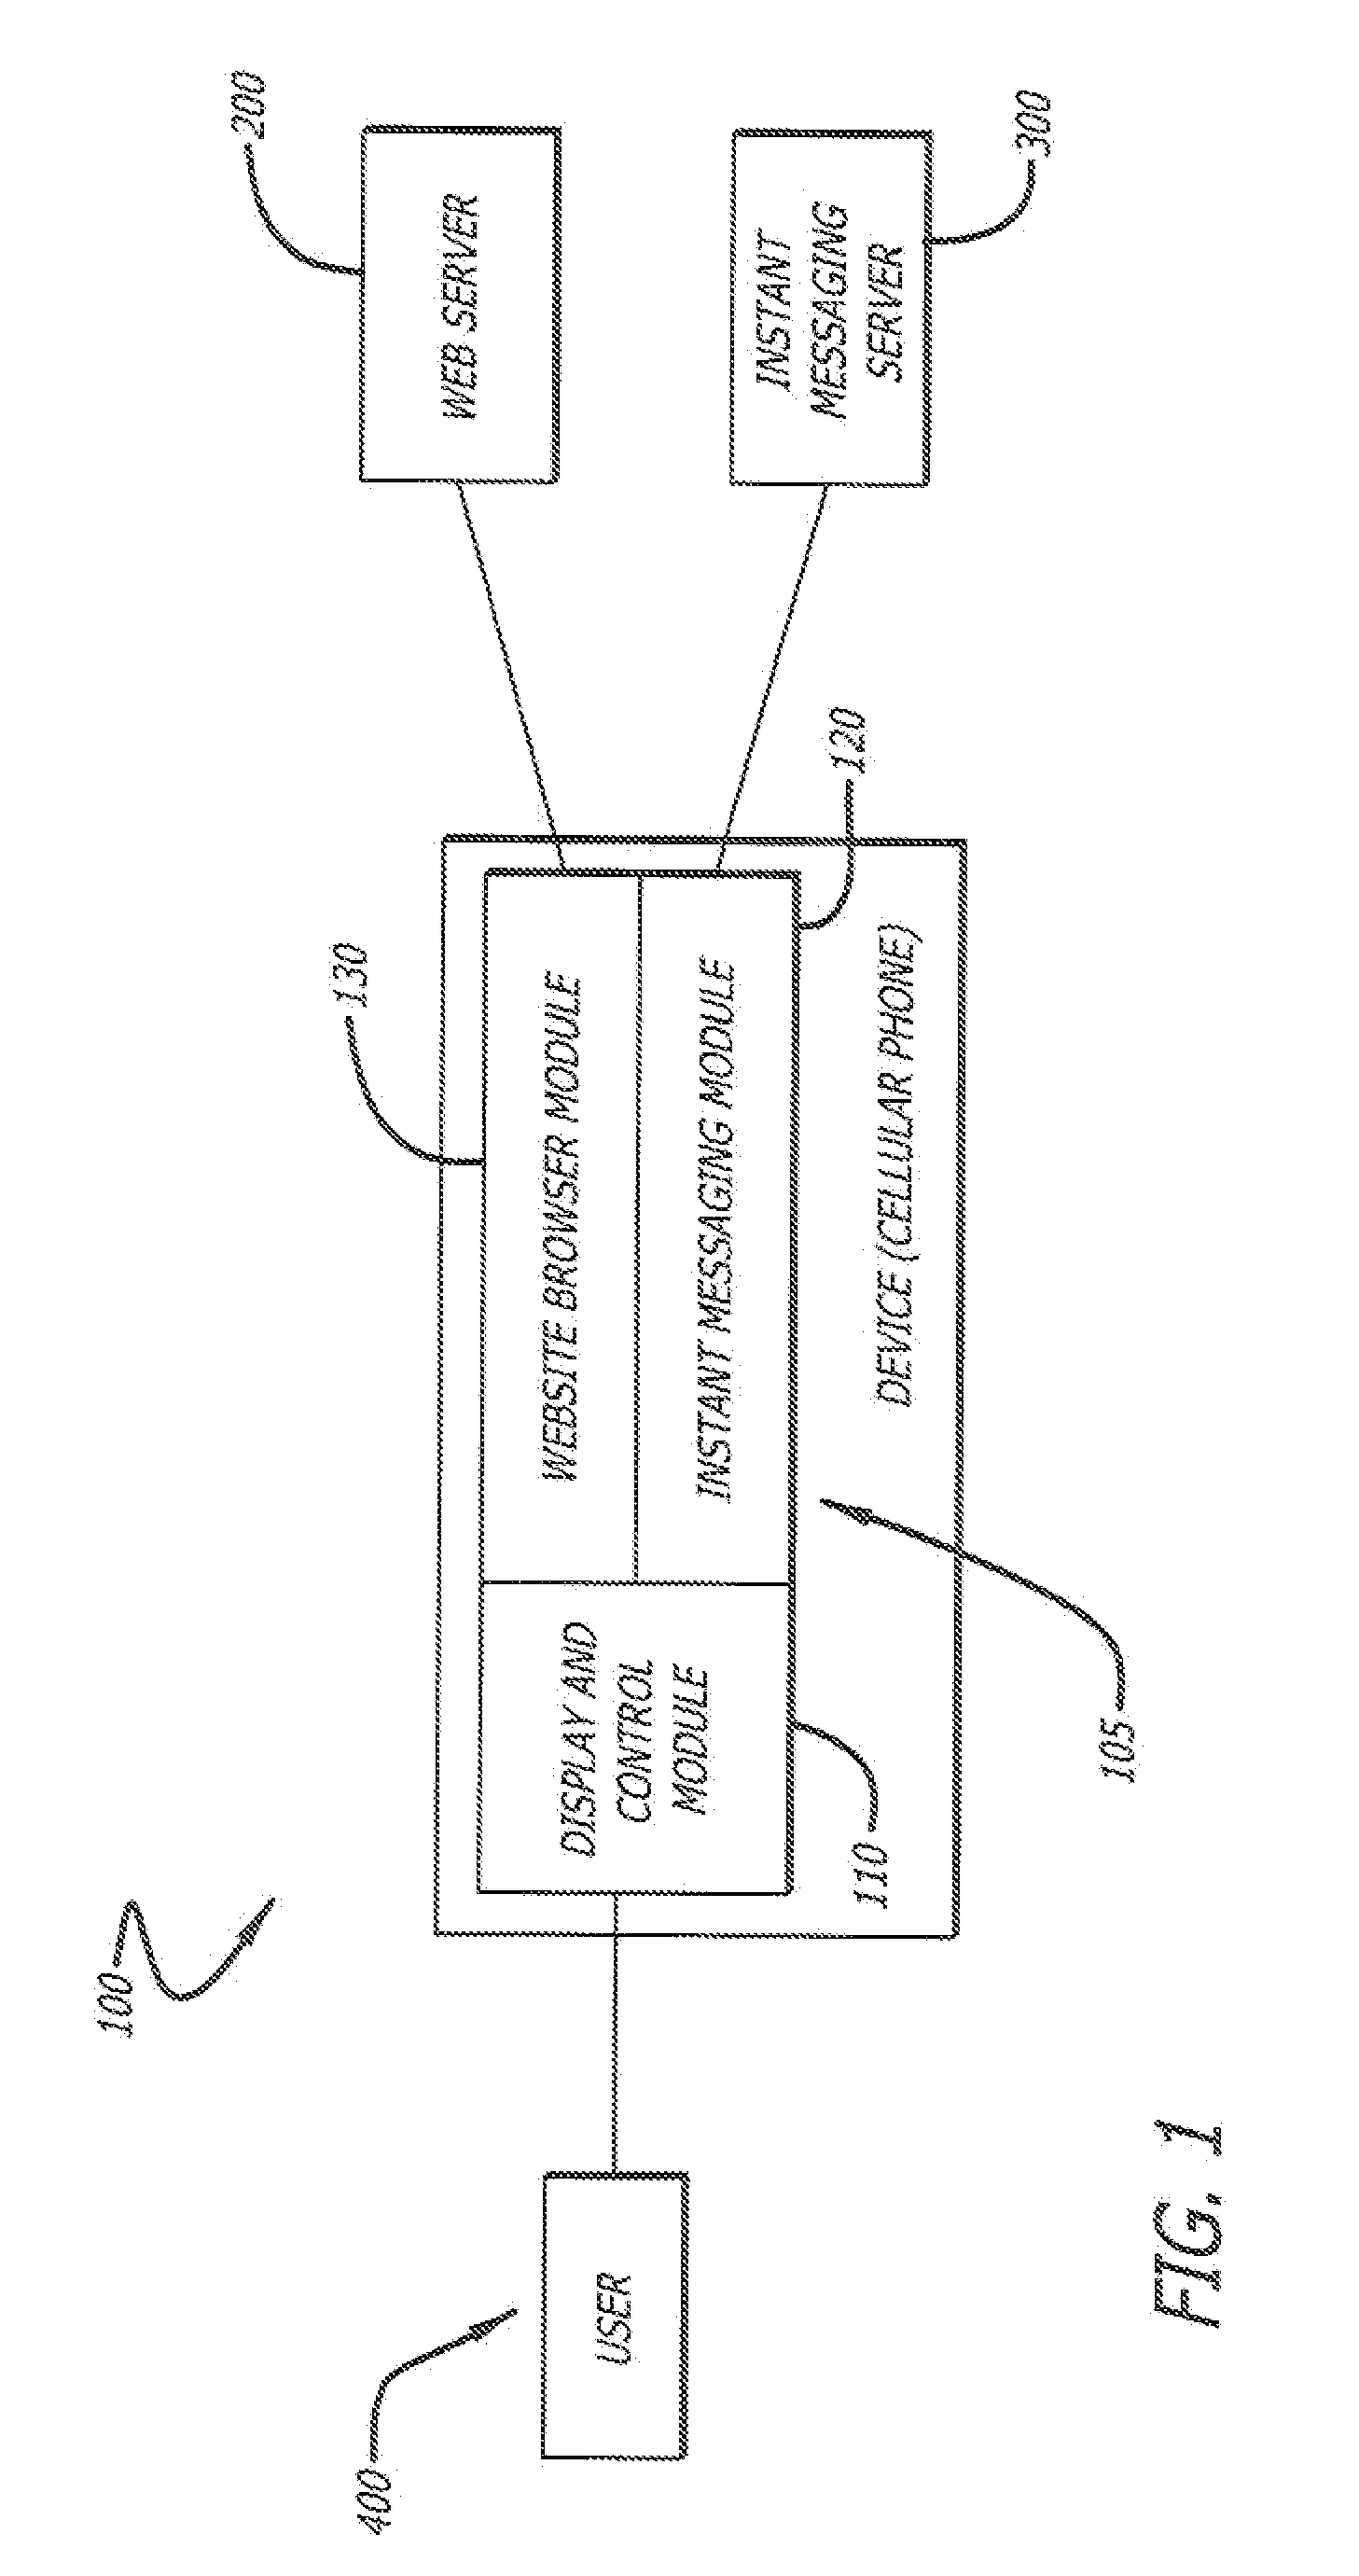 Integrated Instant Messaging and Web Browsing Client and Related Methods